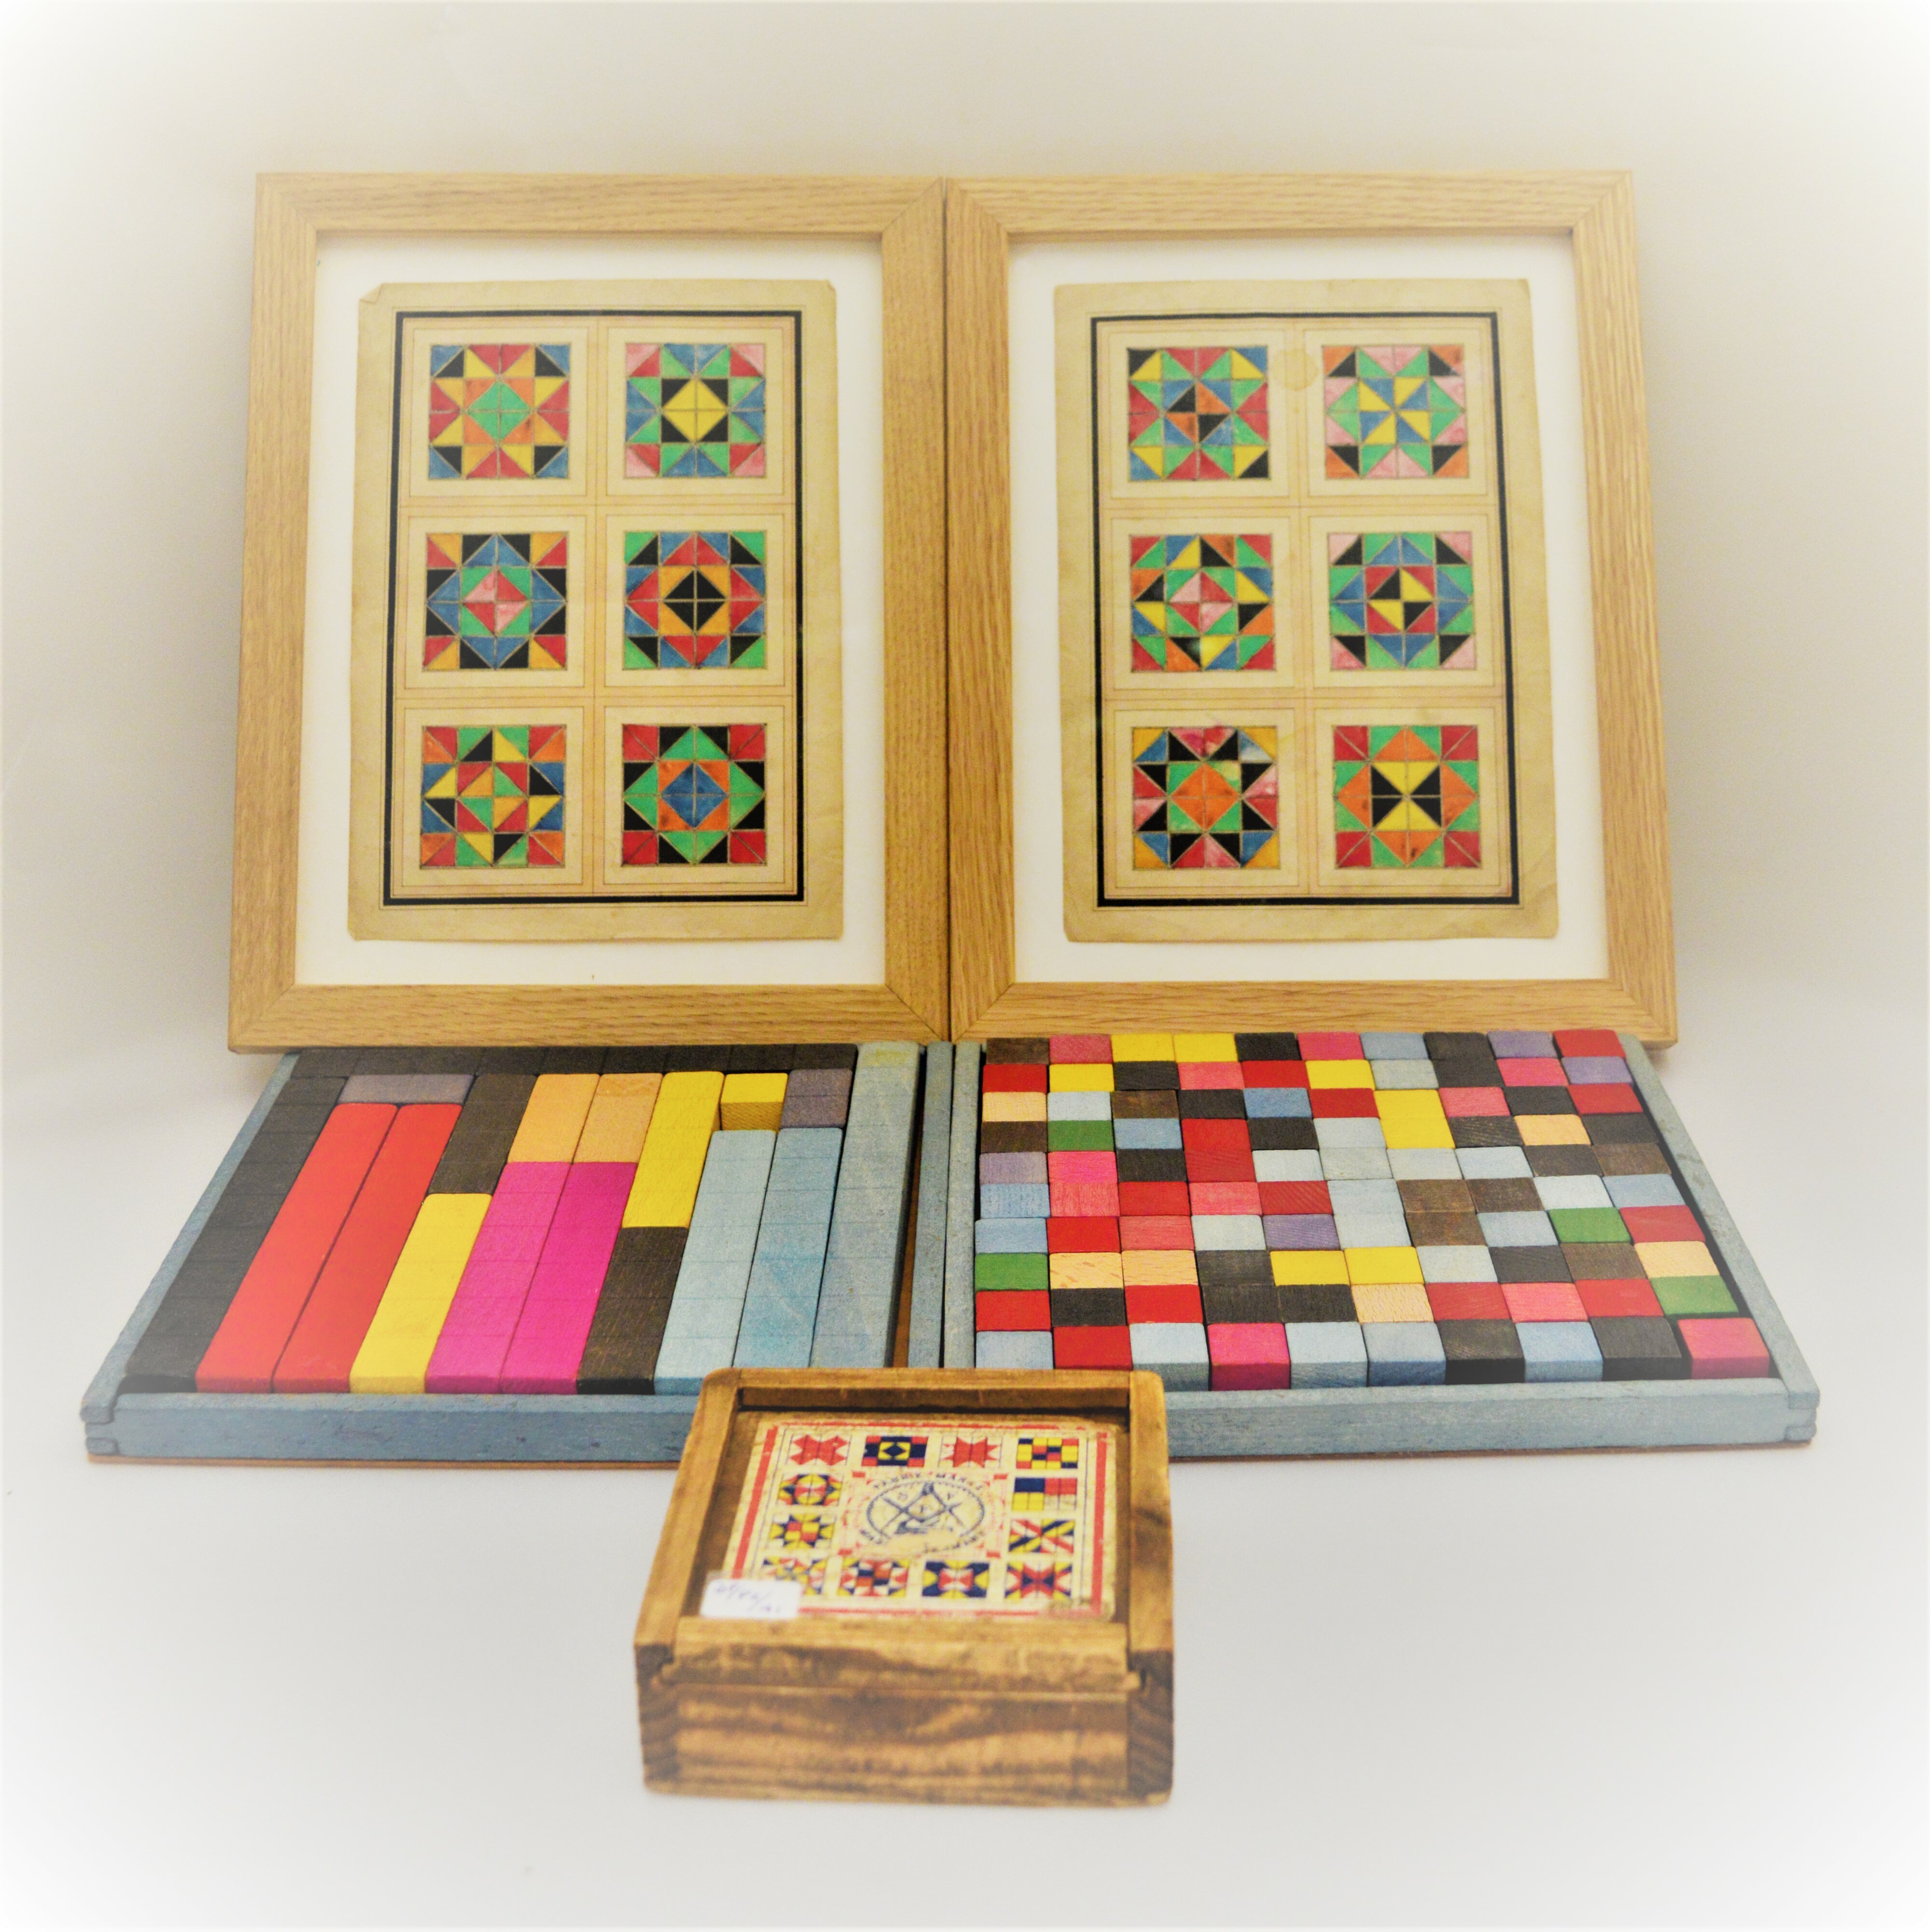 Boxes containing small colourful blocks